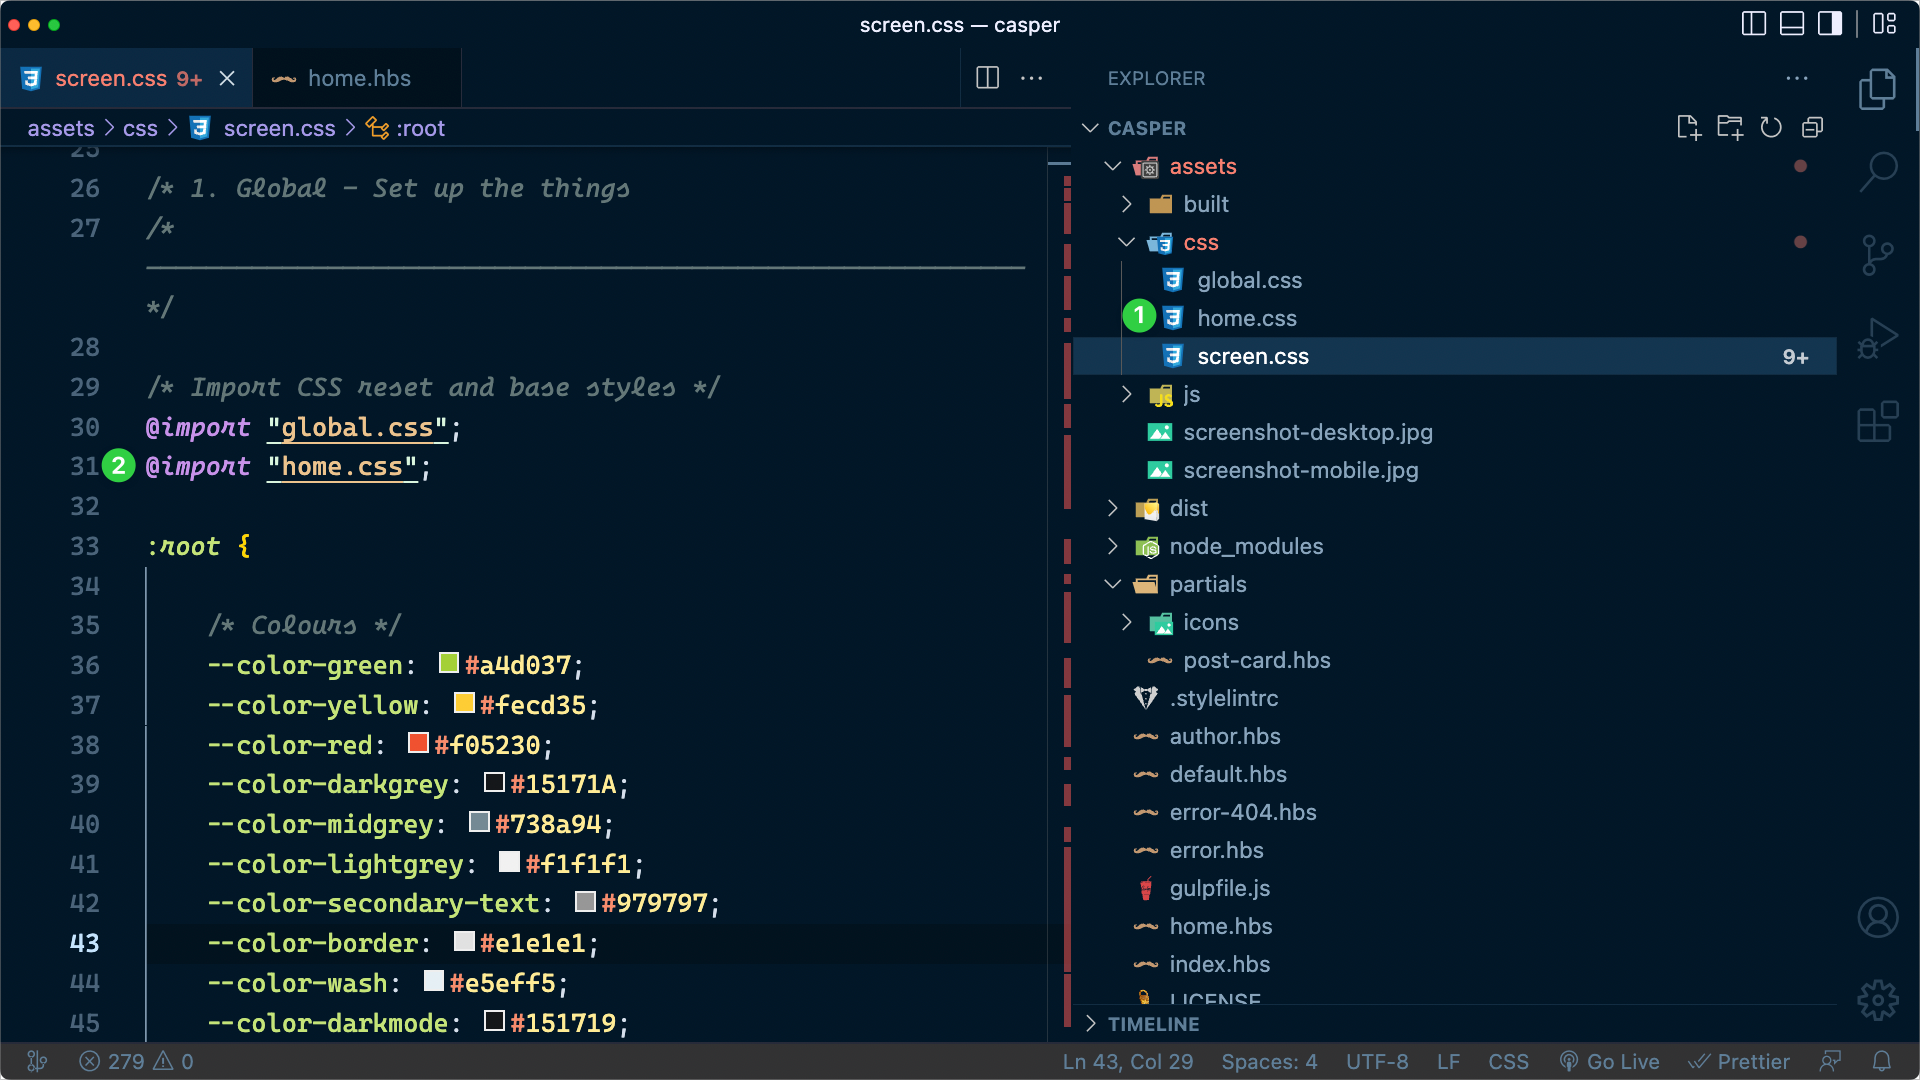 Code editor showing the new home.css file and importing it into screen.css